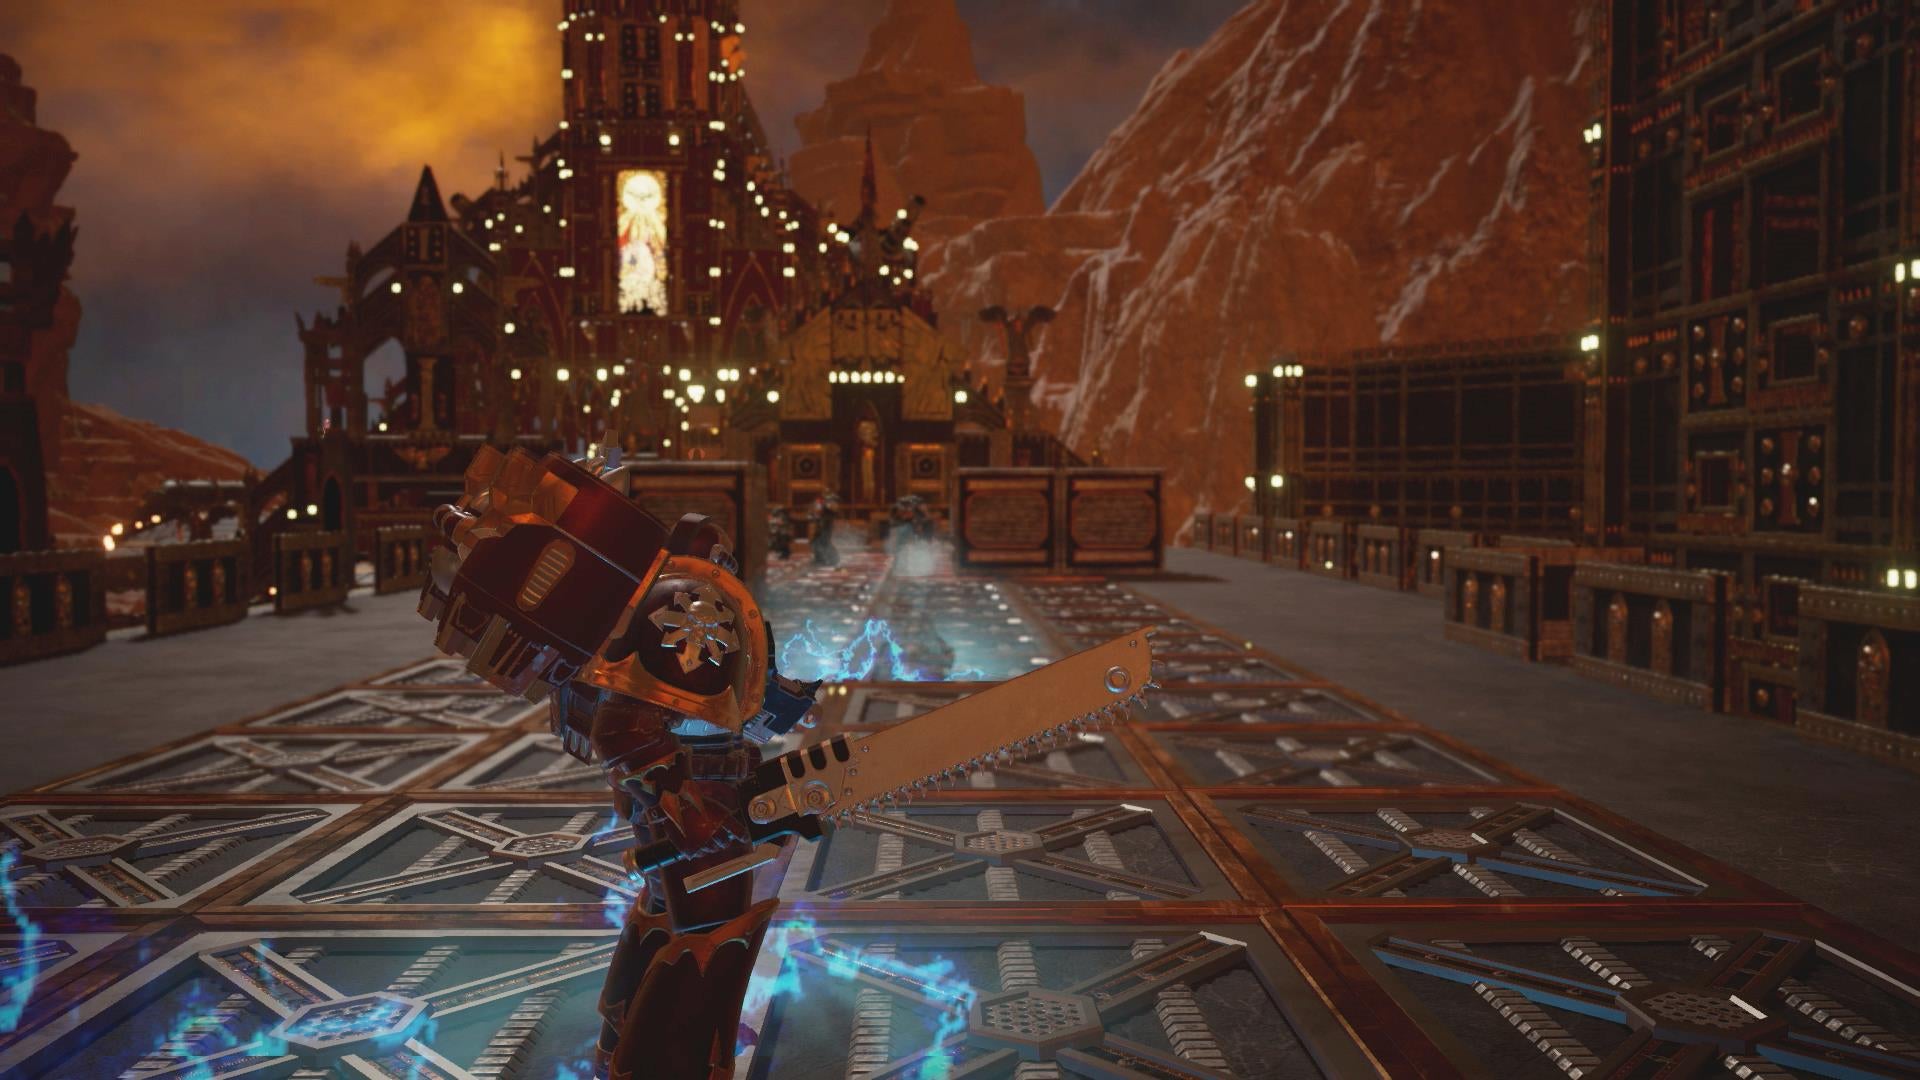 Warhammer 40K: Crusade gets release date, PS4/Xbox One versions | VG247